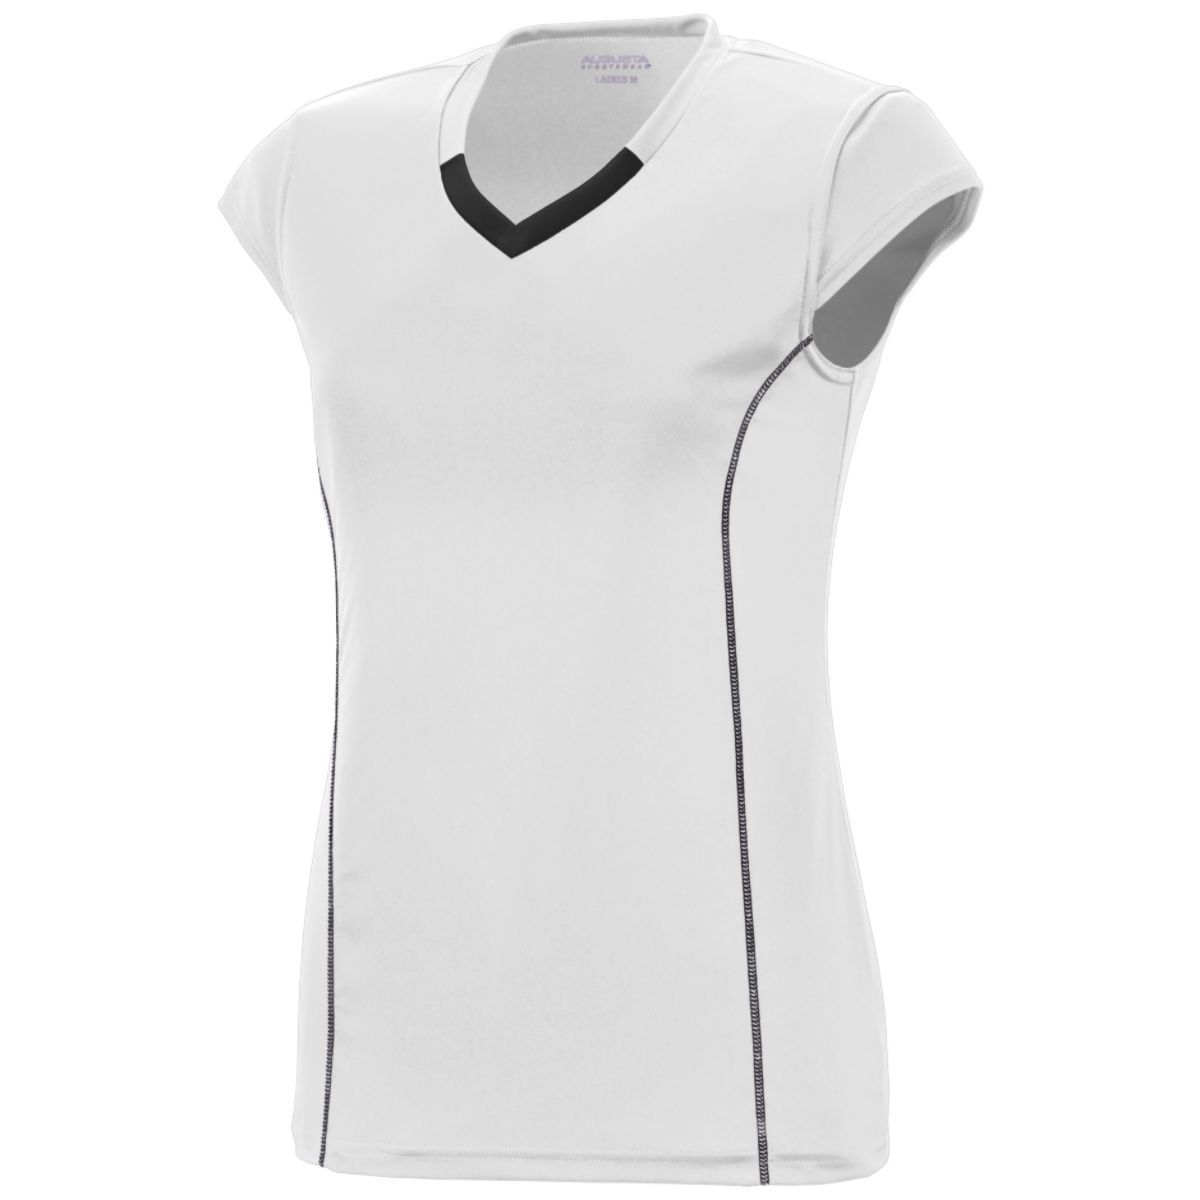 Augusta Sportswear Girls Blash Jersey in White/Black  -Part of the Girls, Augusta-Products, Volleyball, Girls-Jersey, Shirts product lines at KanaleyCreations.com